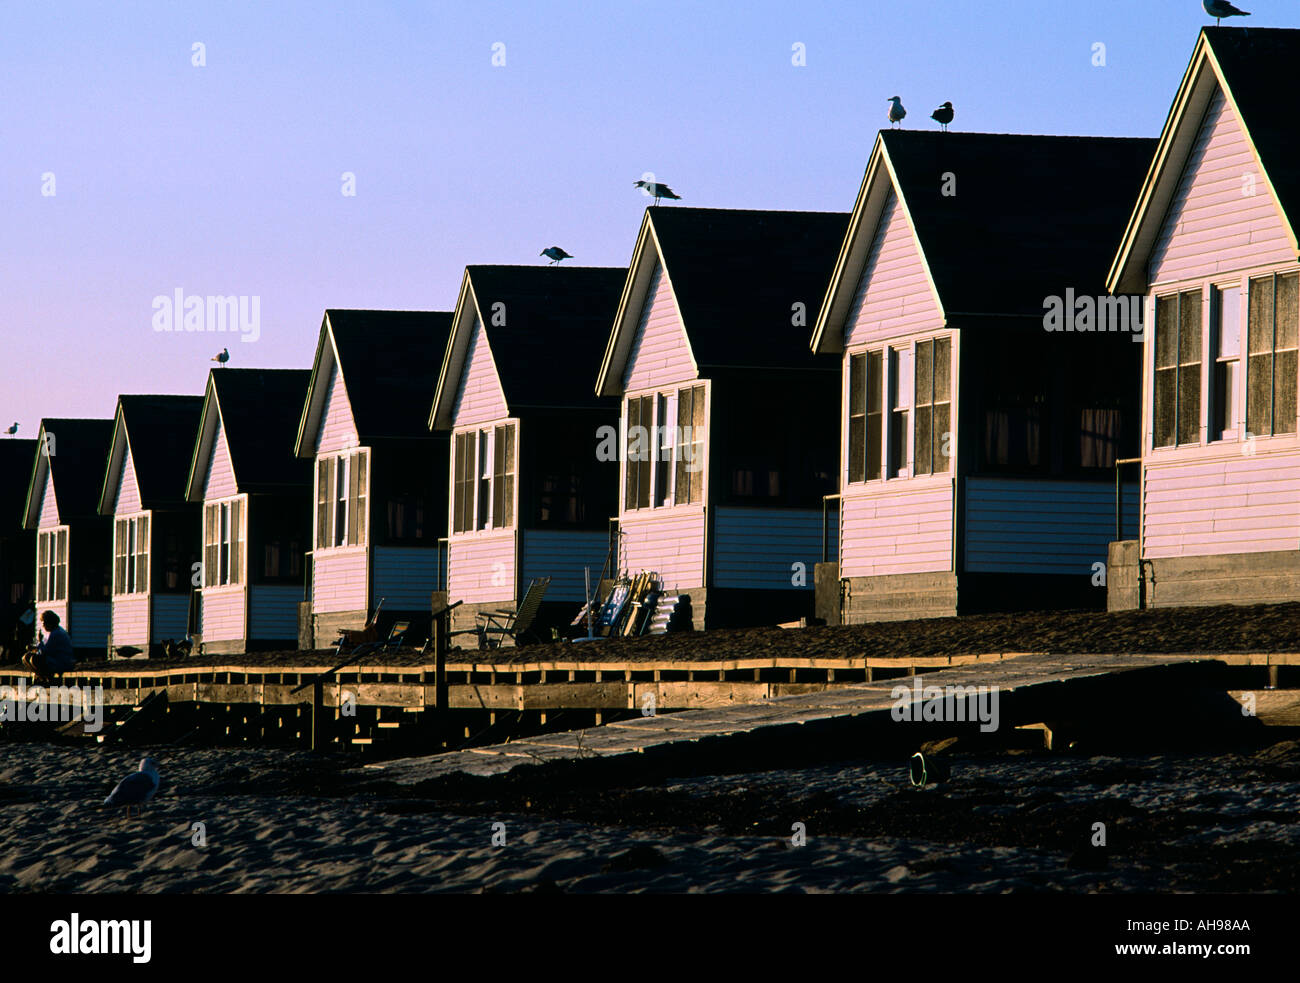 Vacation cottages along the beach in North Truro on Cape Cod Massachusetts Stock Photo